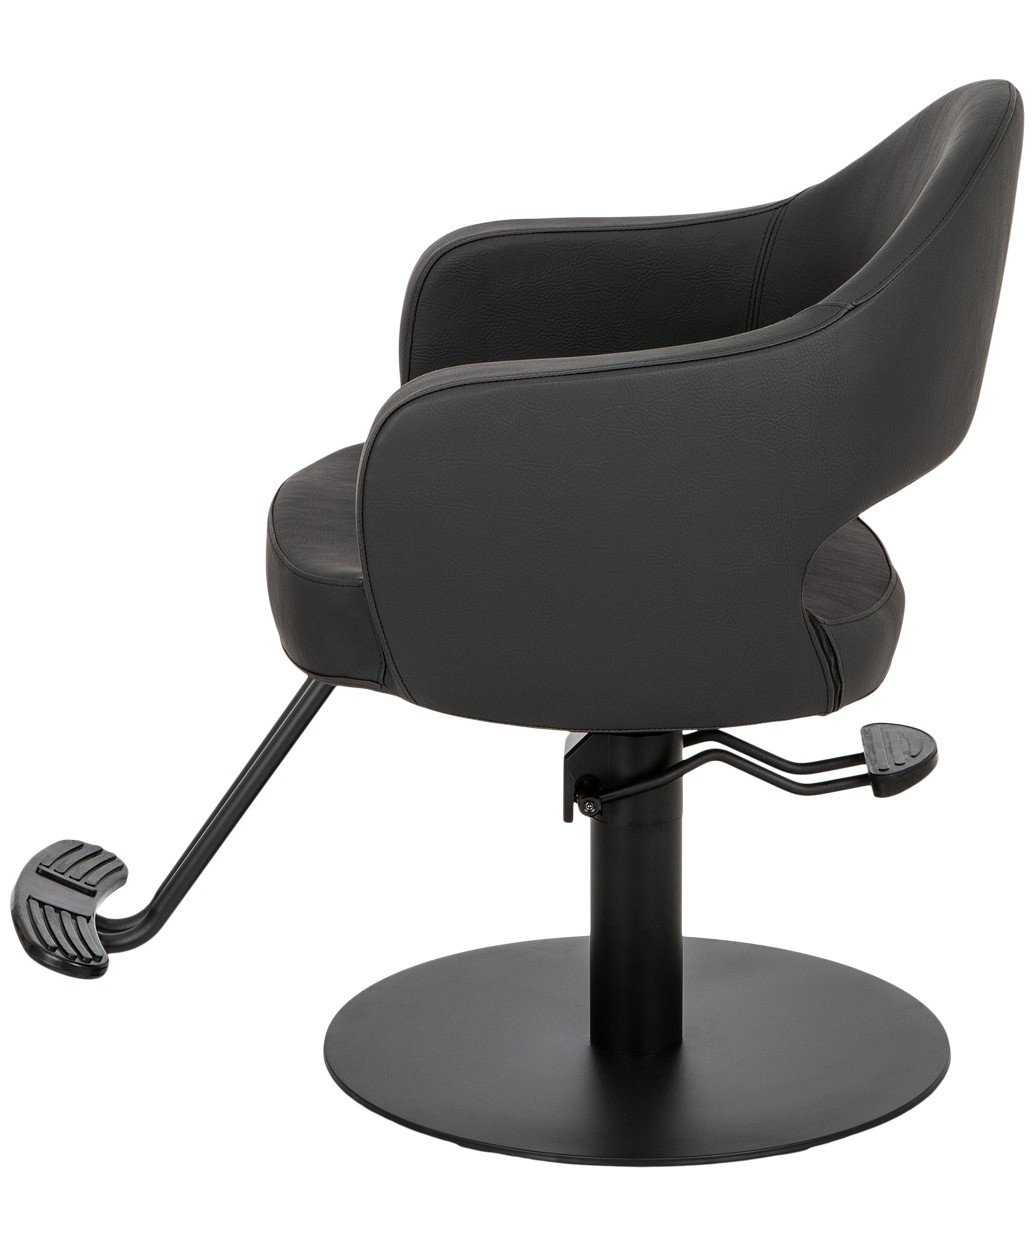 Cleo Salon Styling Chair